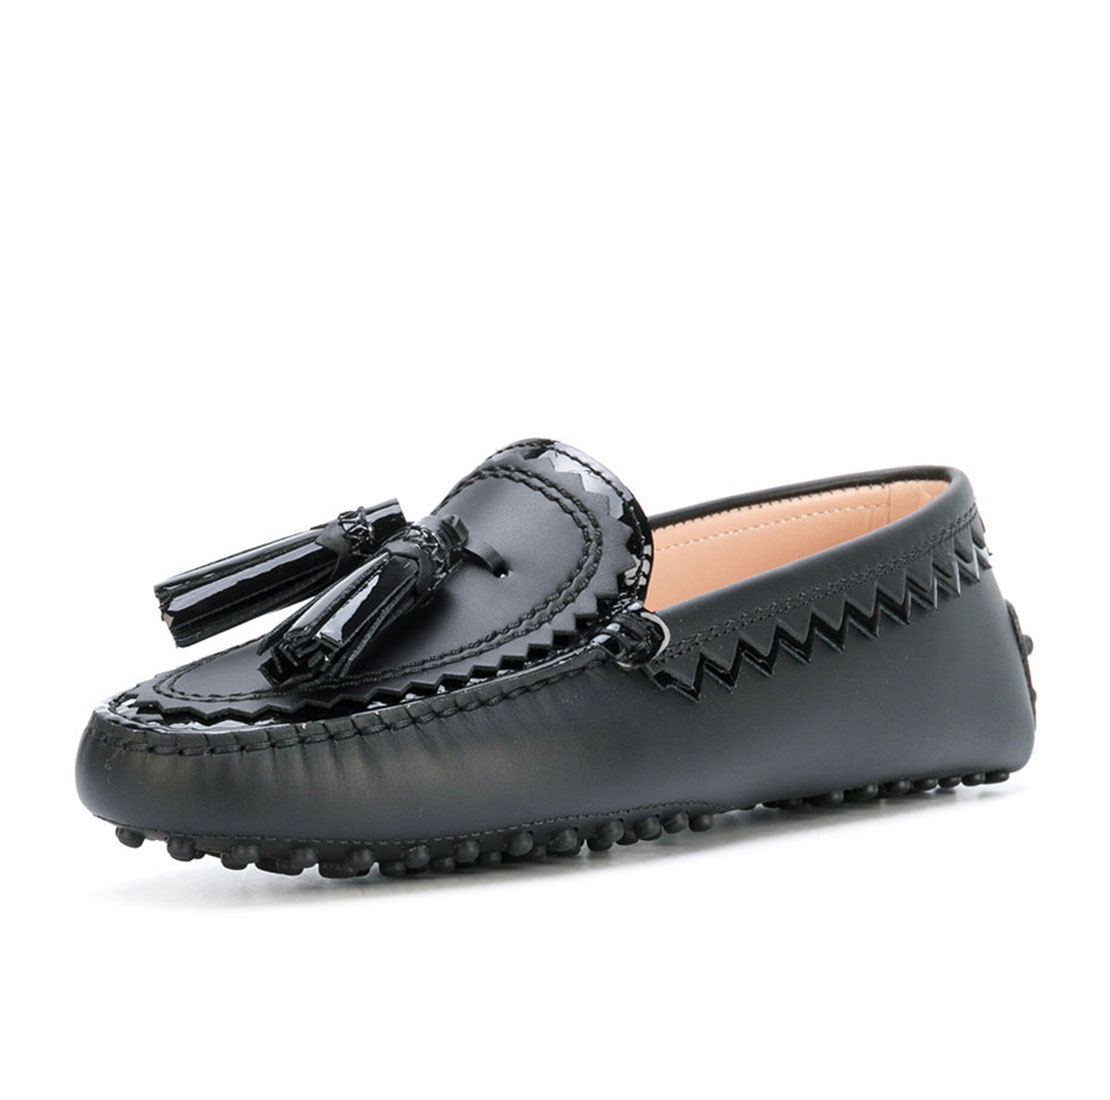 Genuine leather black comfortable tassels ladies moccasin gommino shoes ...